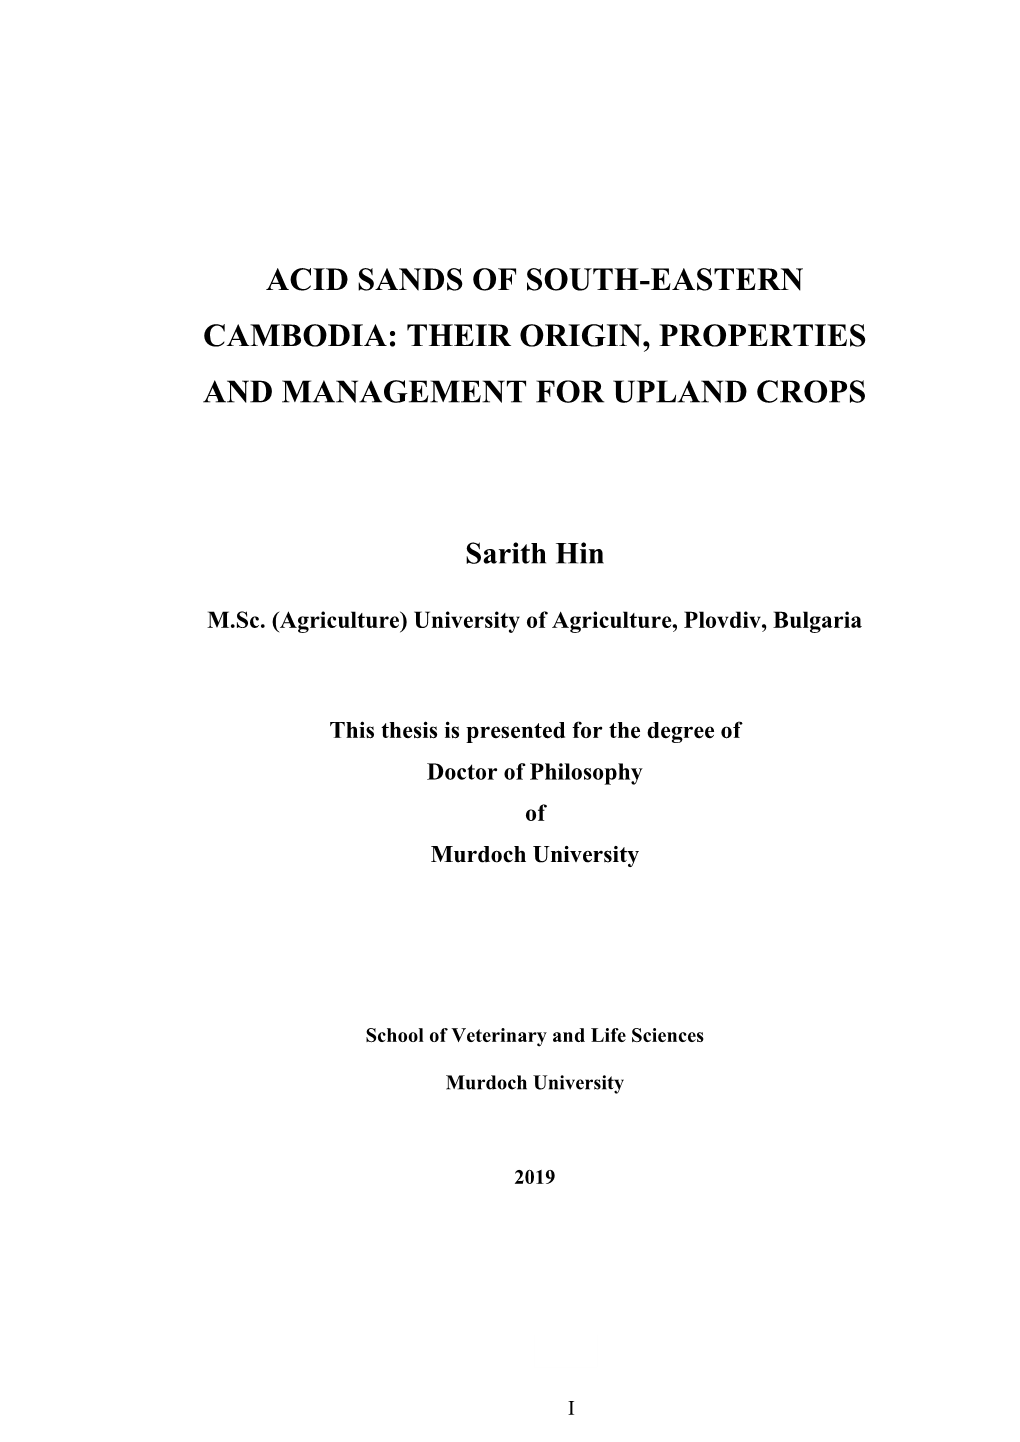 Acid Sands of South-Eastern Cambodia: Their Origin, Properties and Management for Upland Crops